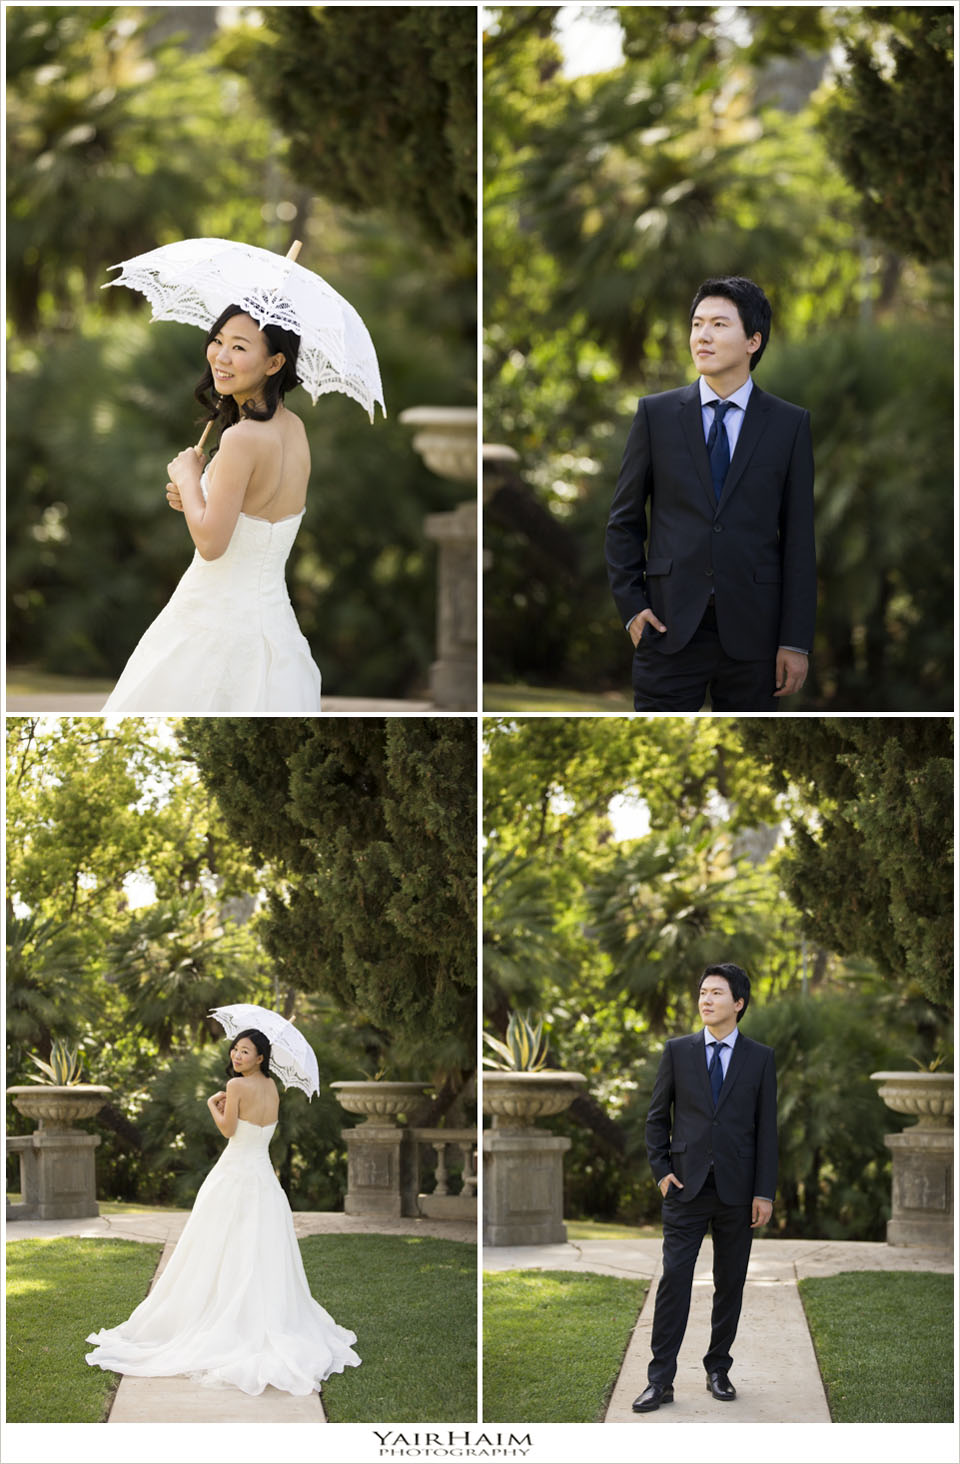 Kimberly-Crest-wedding-pictures-photography-California-5